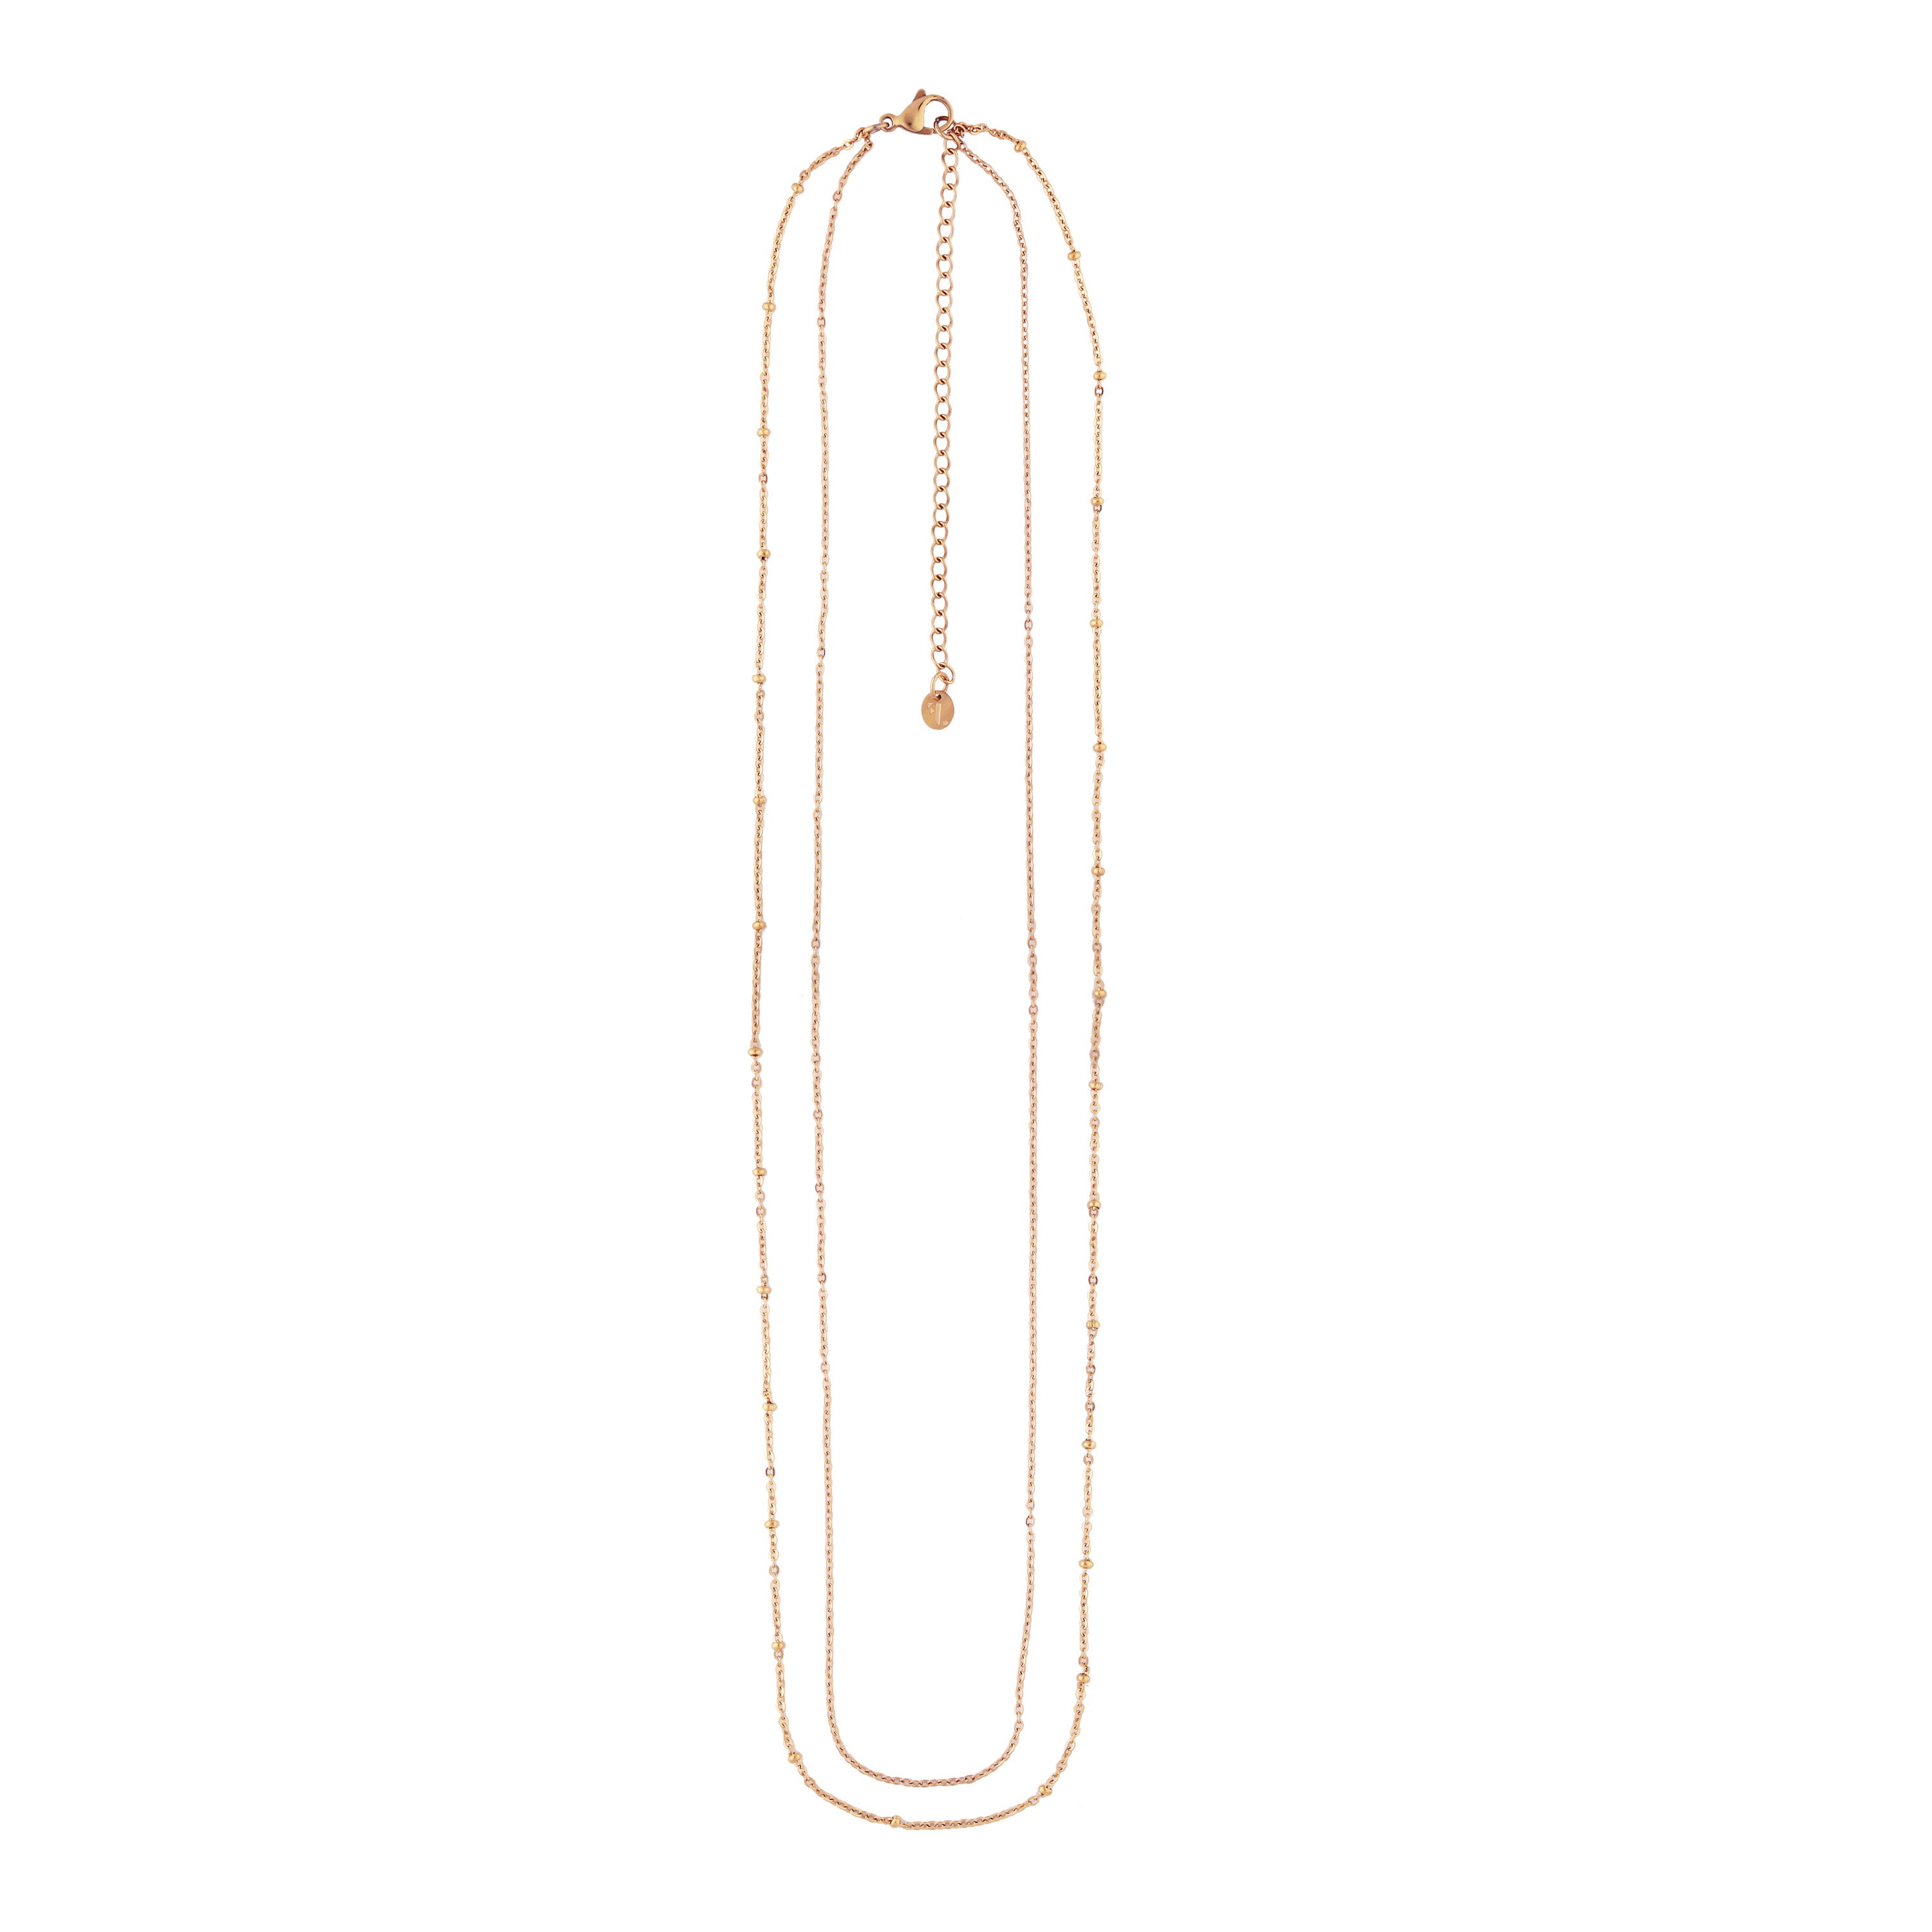 FJ Watches waist body chain layered cable row of beads 10cm ecxtension 68cm 76cm rose gold rosegold